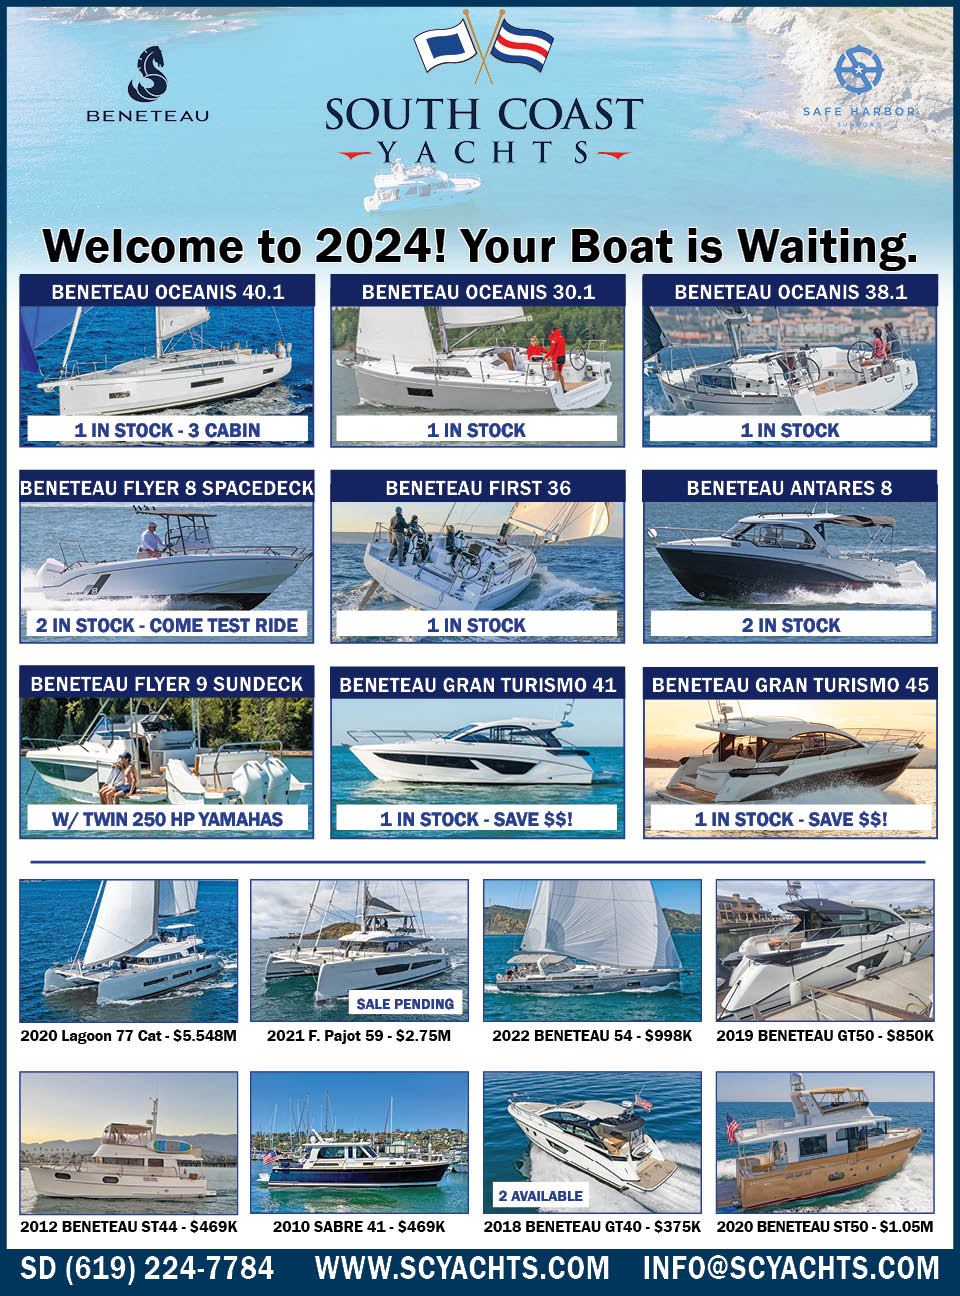 South Coast Yachts advertisement in The Log